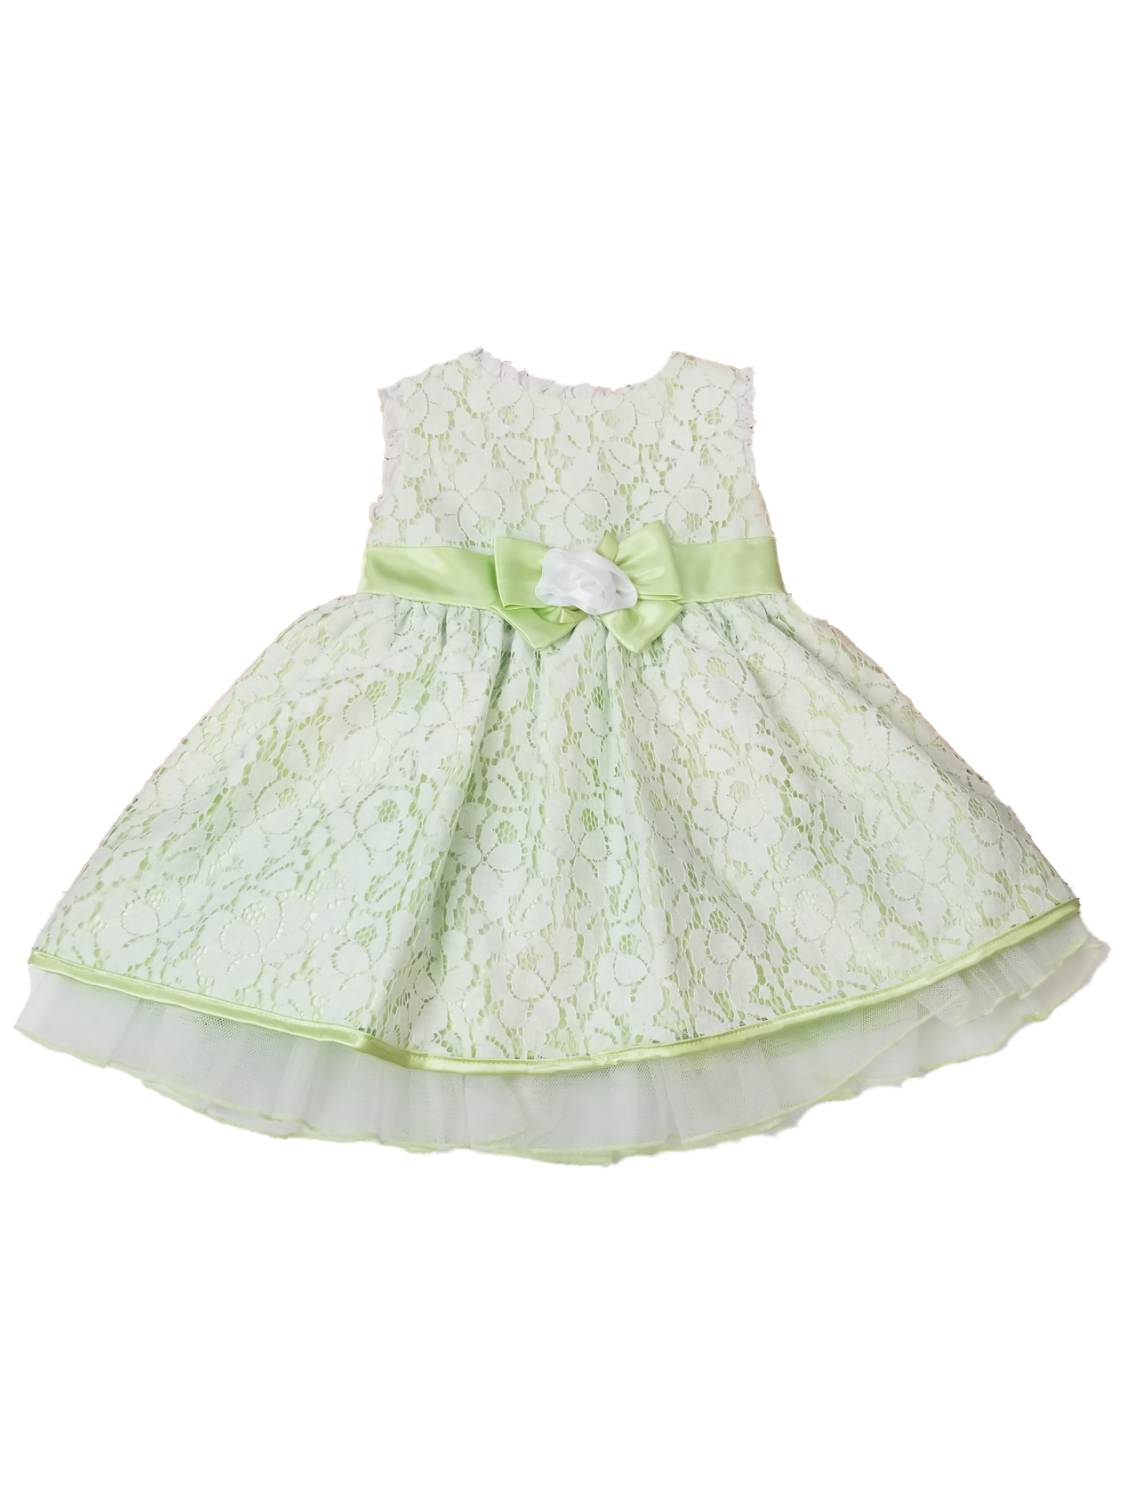 GEORGE Infant Baby Girls Mint Green Lace Easter Spring Holiday Party Dress